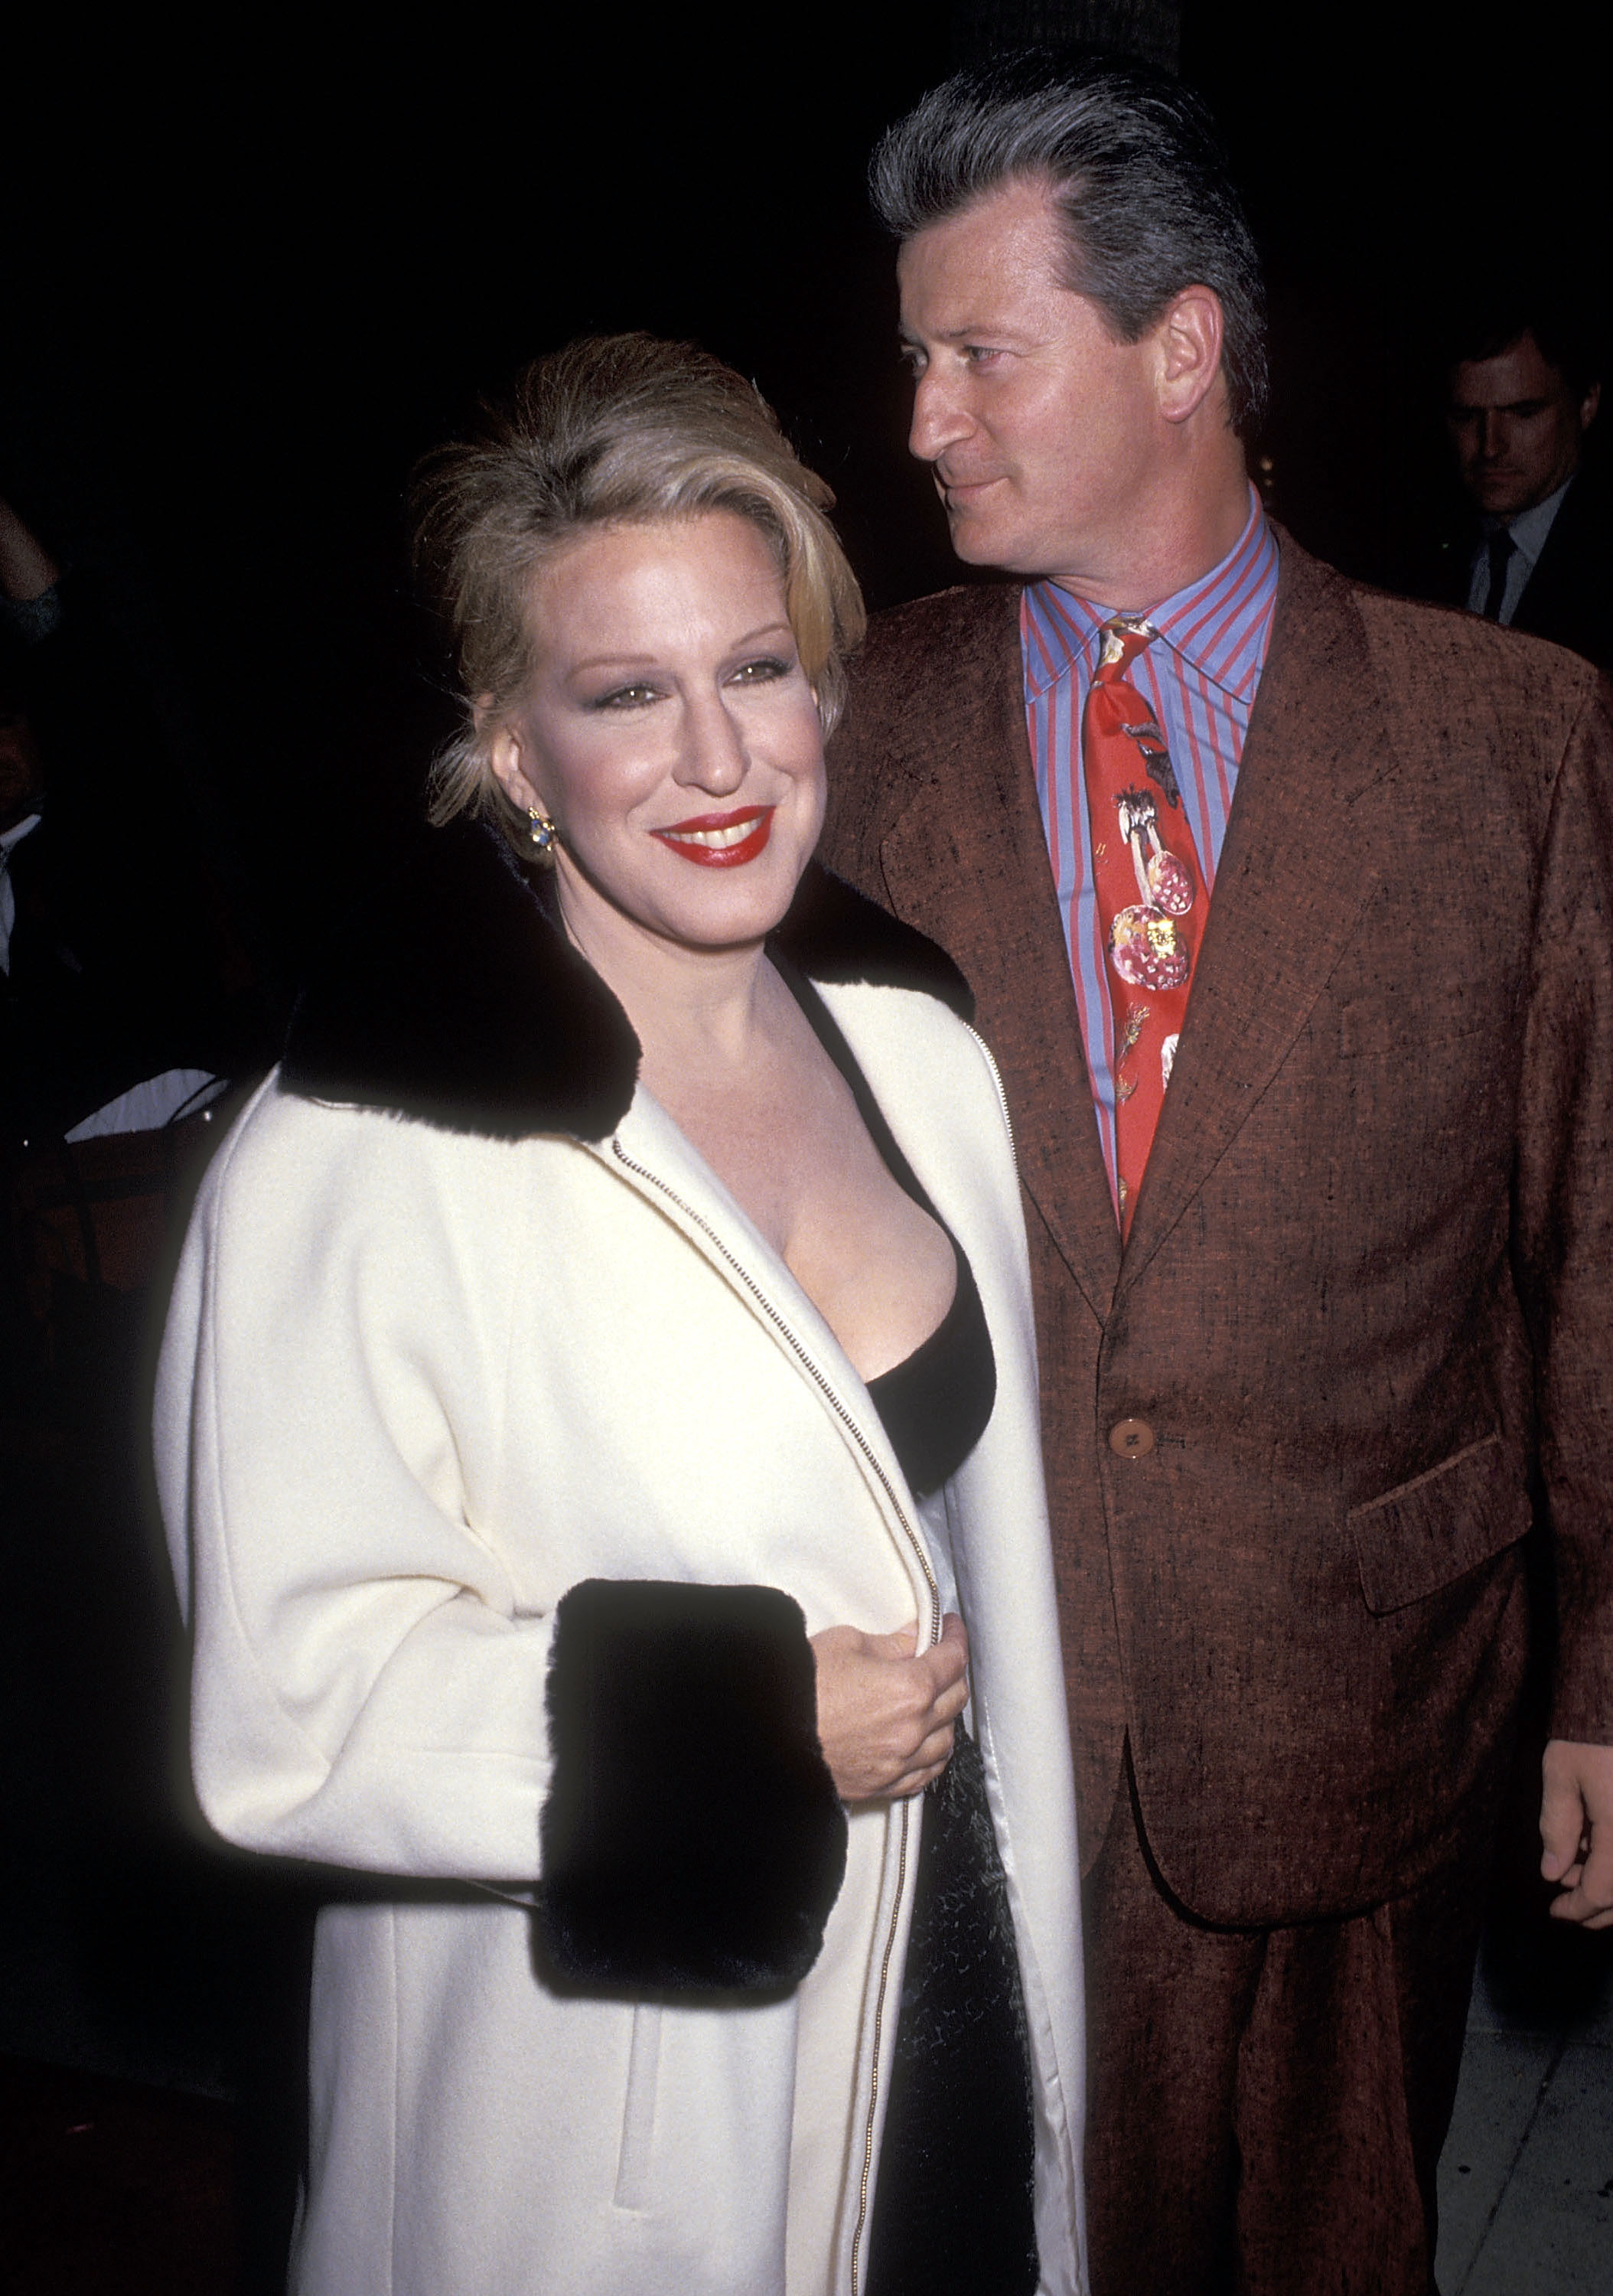 Bette Midler and Martin von Haselberg in California in 1991 | Source: Getty Images